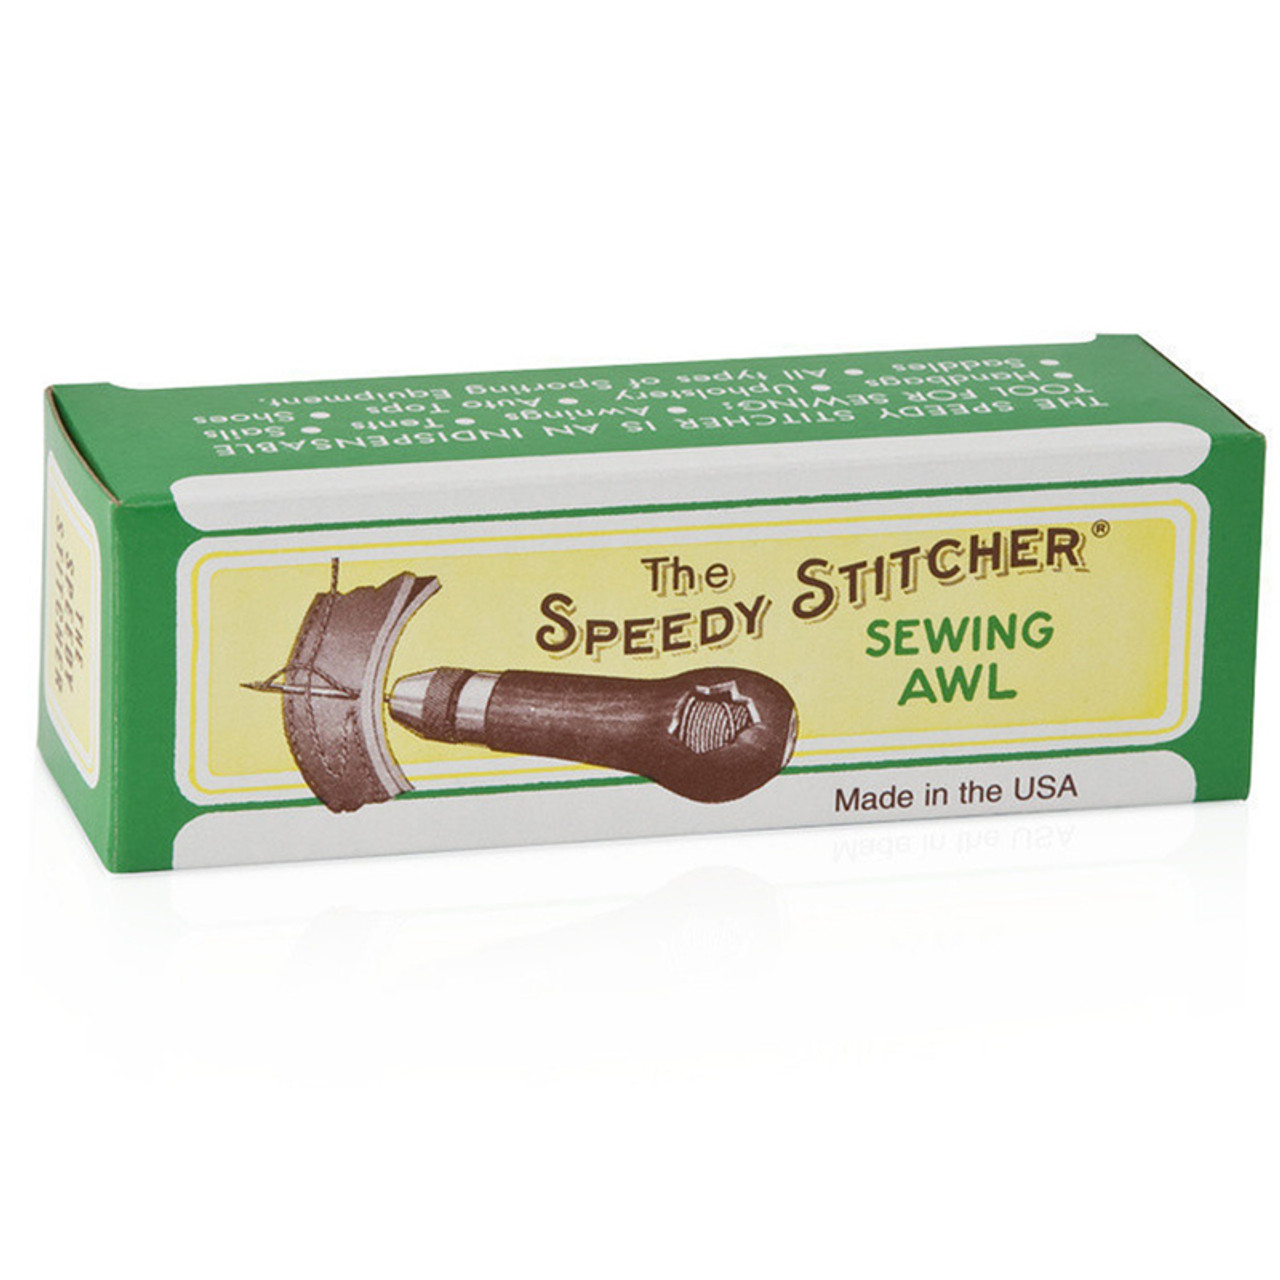 The Speedy Stitcher Sewing Awl Kit with Threads and Needles